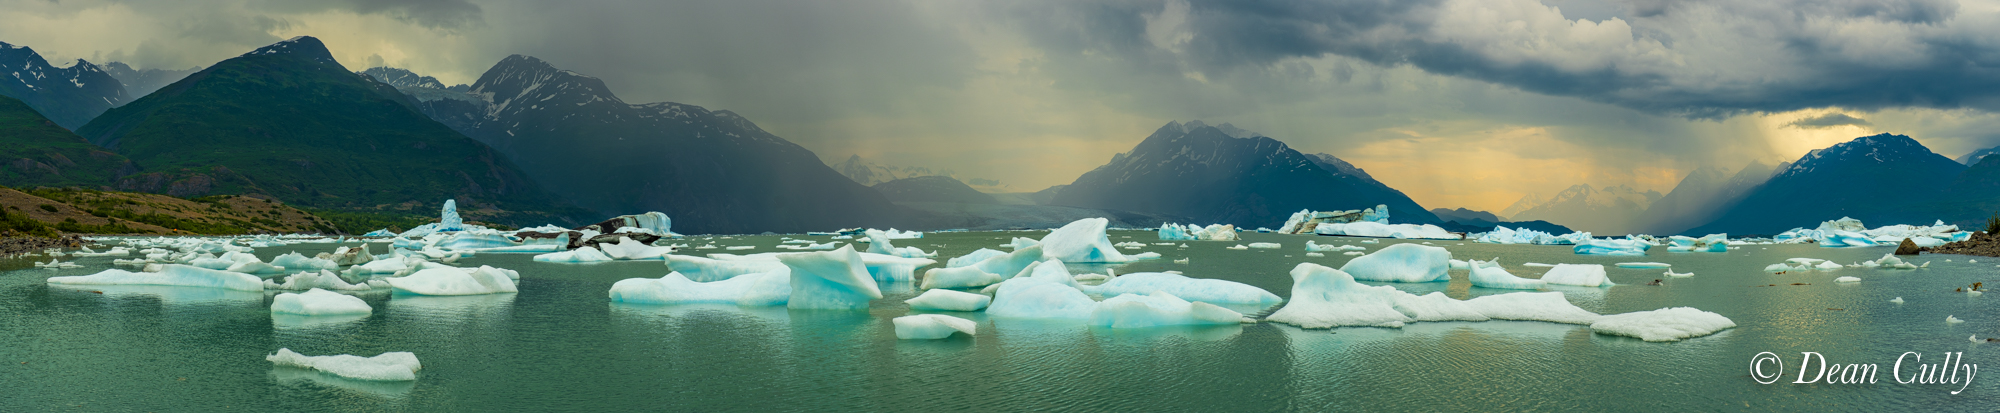 lake_george_glacier_icebergs_panoramic_deancully